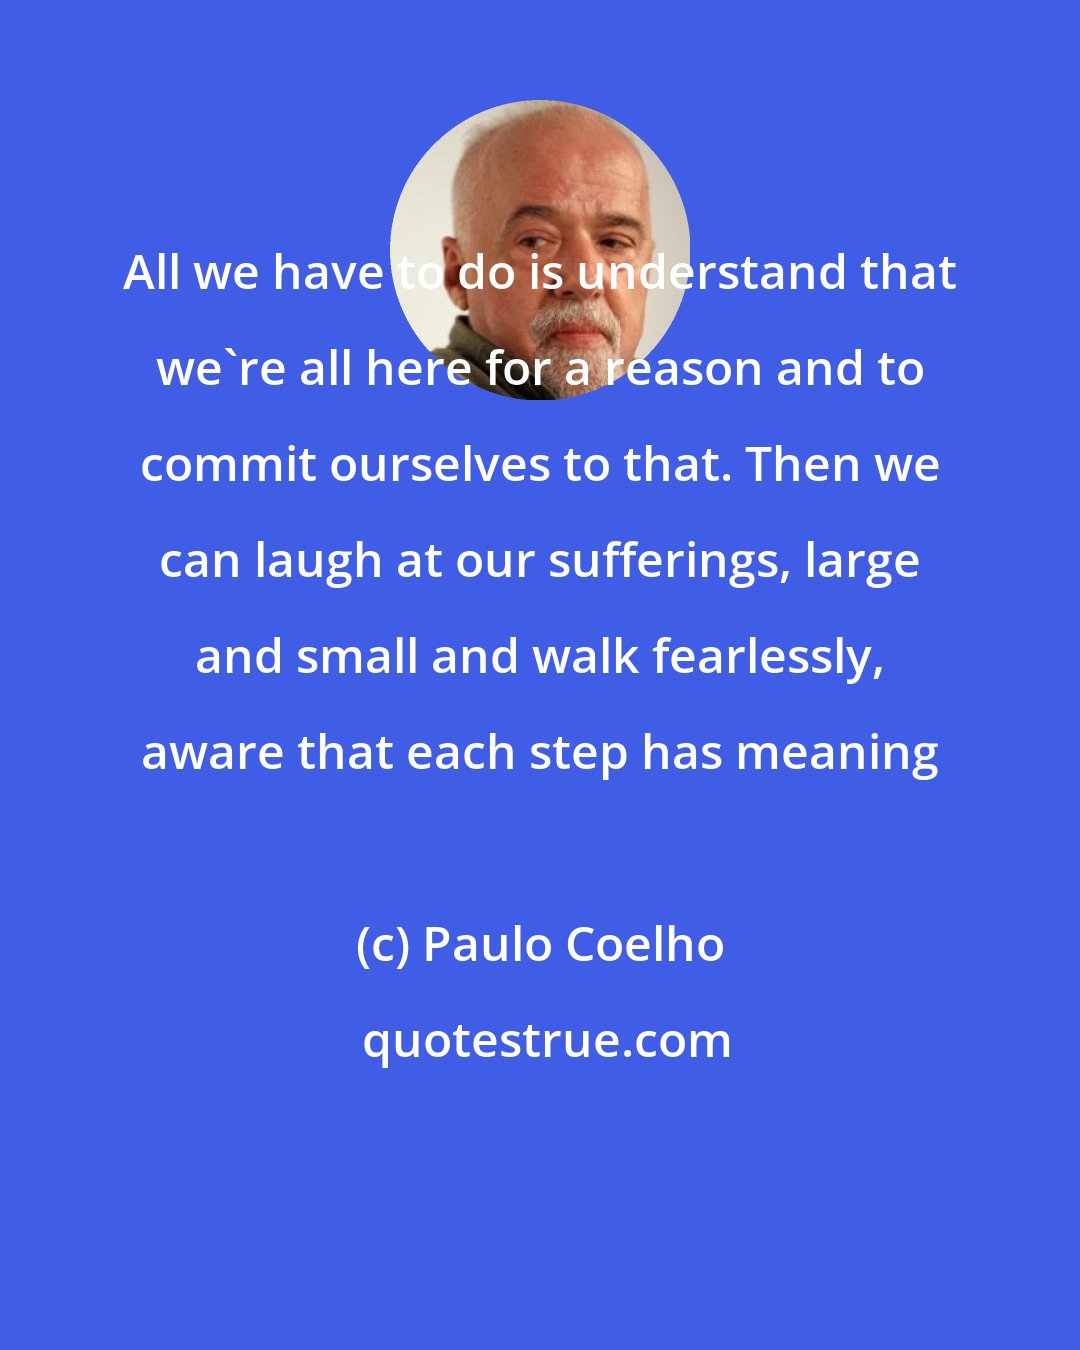 Paulo Coelho: All we have to do is understand that we're all here for a reason and to commit ourselves to that. Then we can laugh at our sufferings, large and small and walk fearlessly, aware that each step has meaning